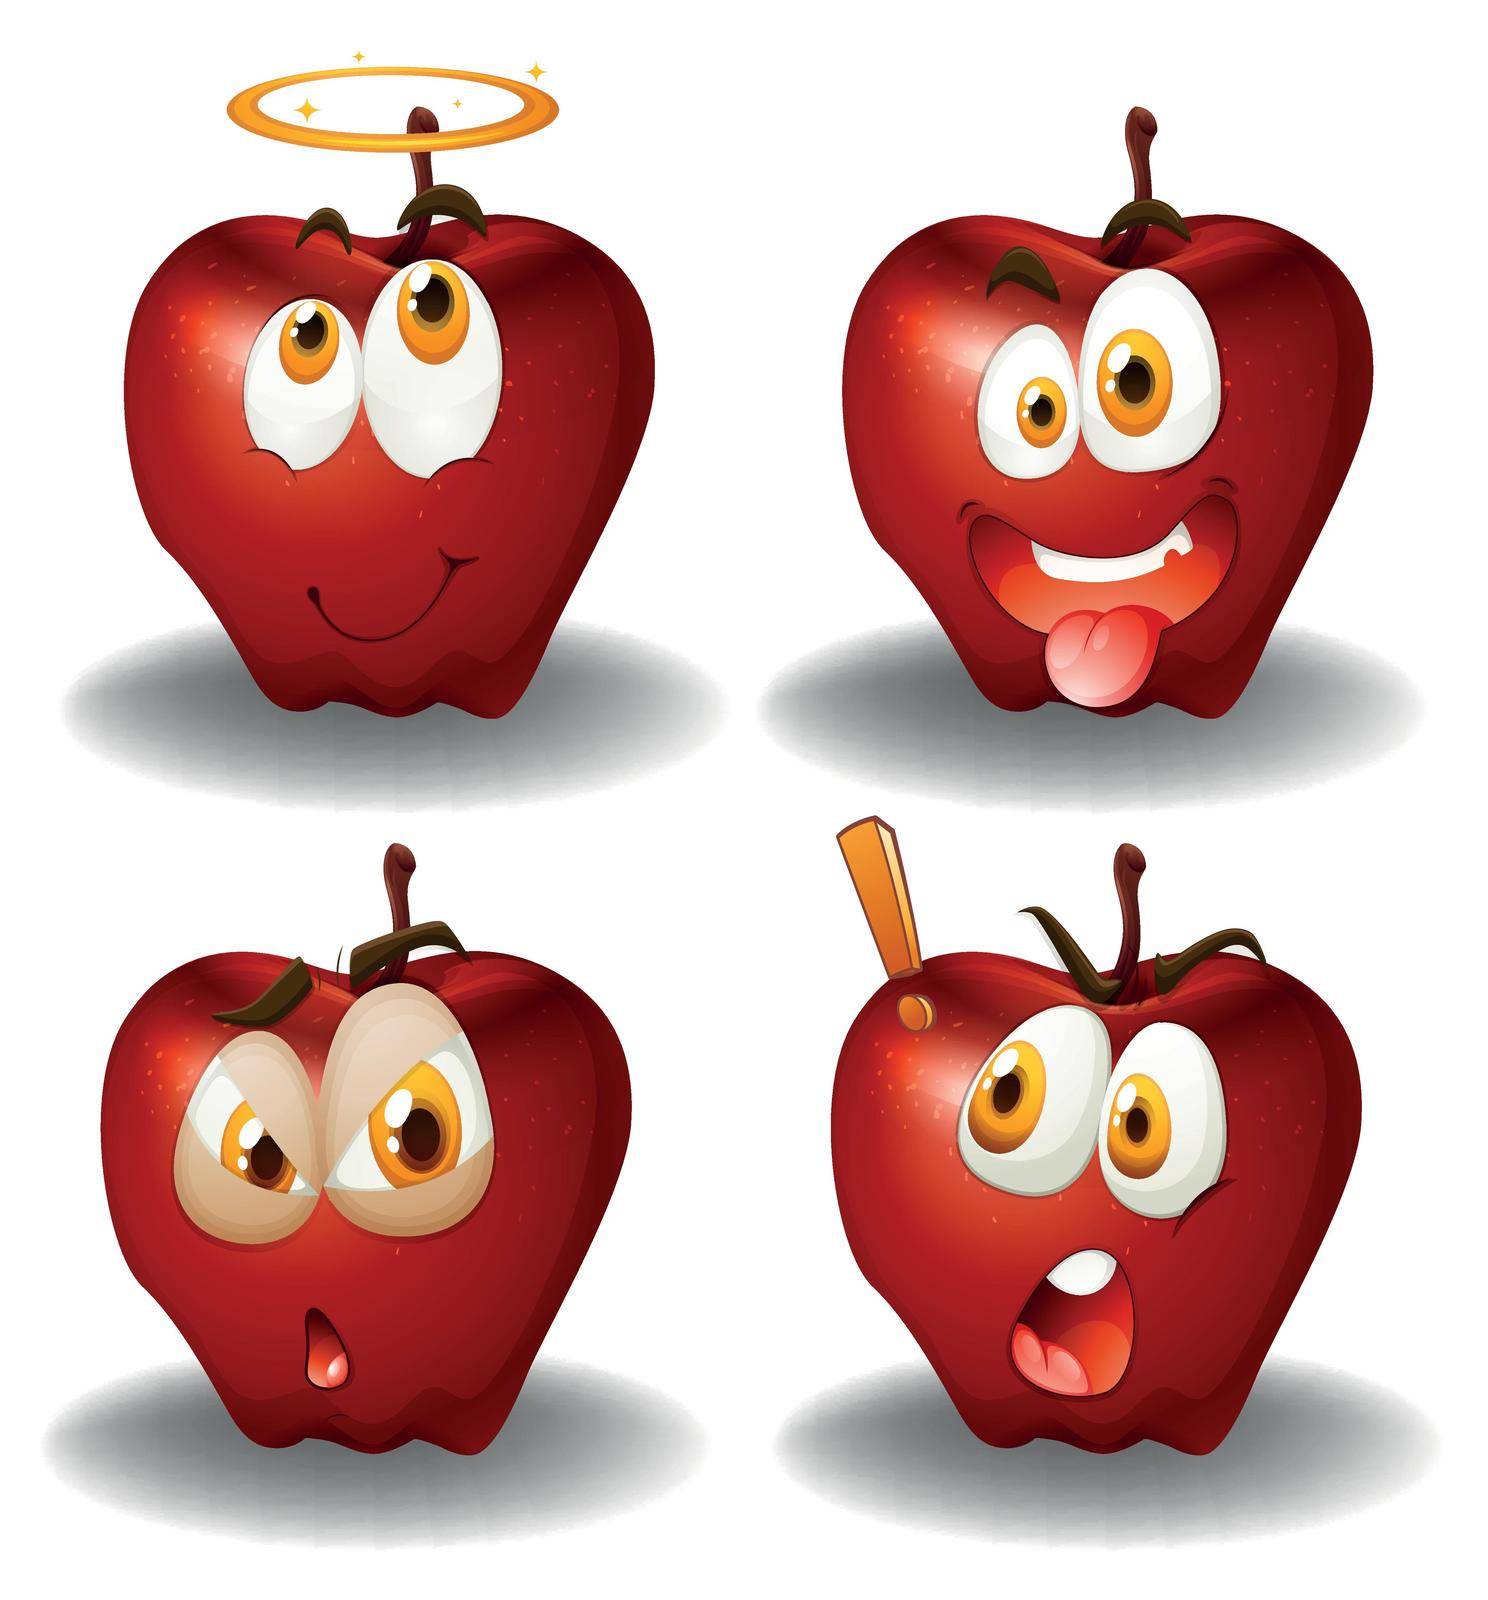 Facial expression on apples by iimages